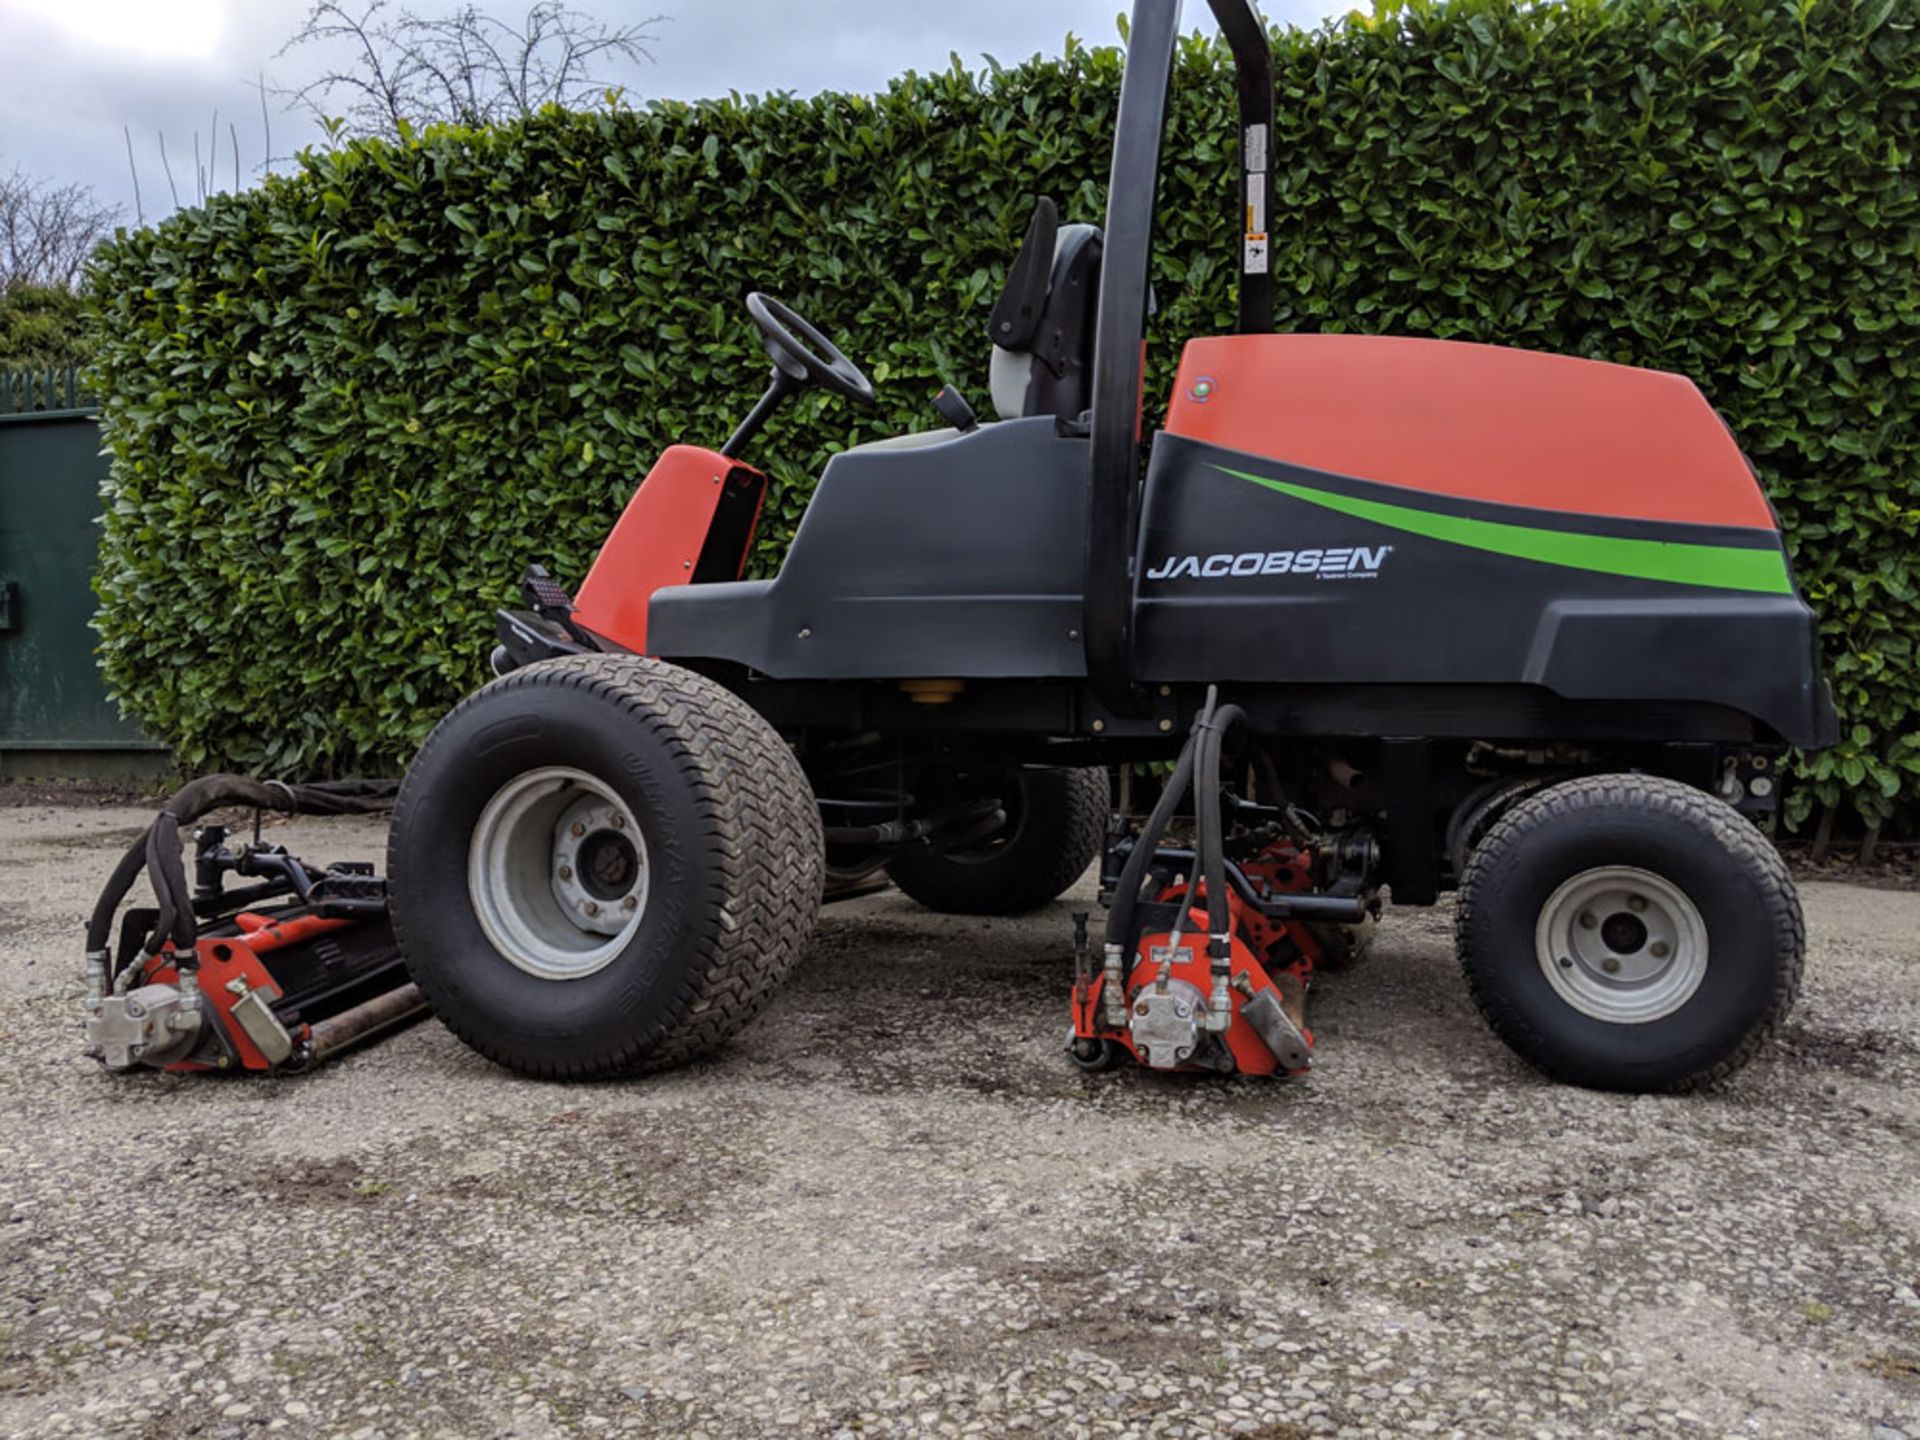 2007 Ransomes Jacobsen LF3800 4WD Cylinder Mower - Image 3 of 9